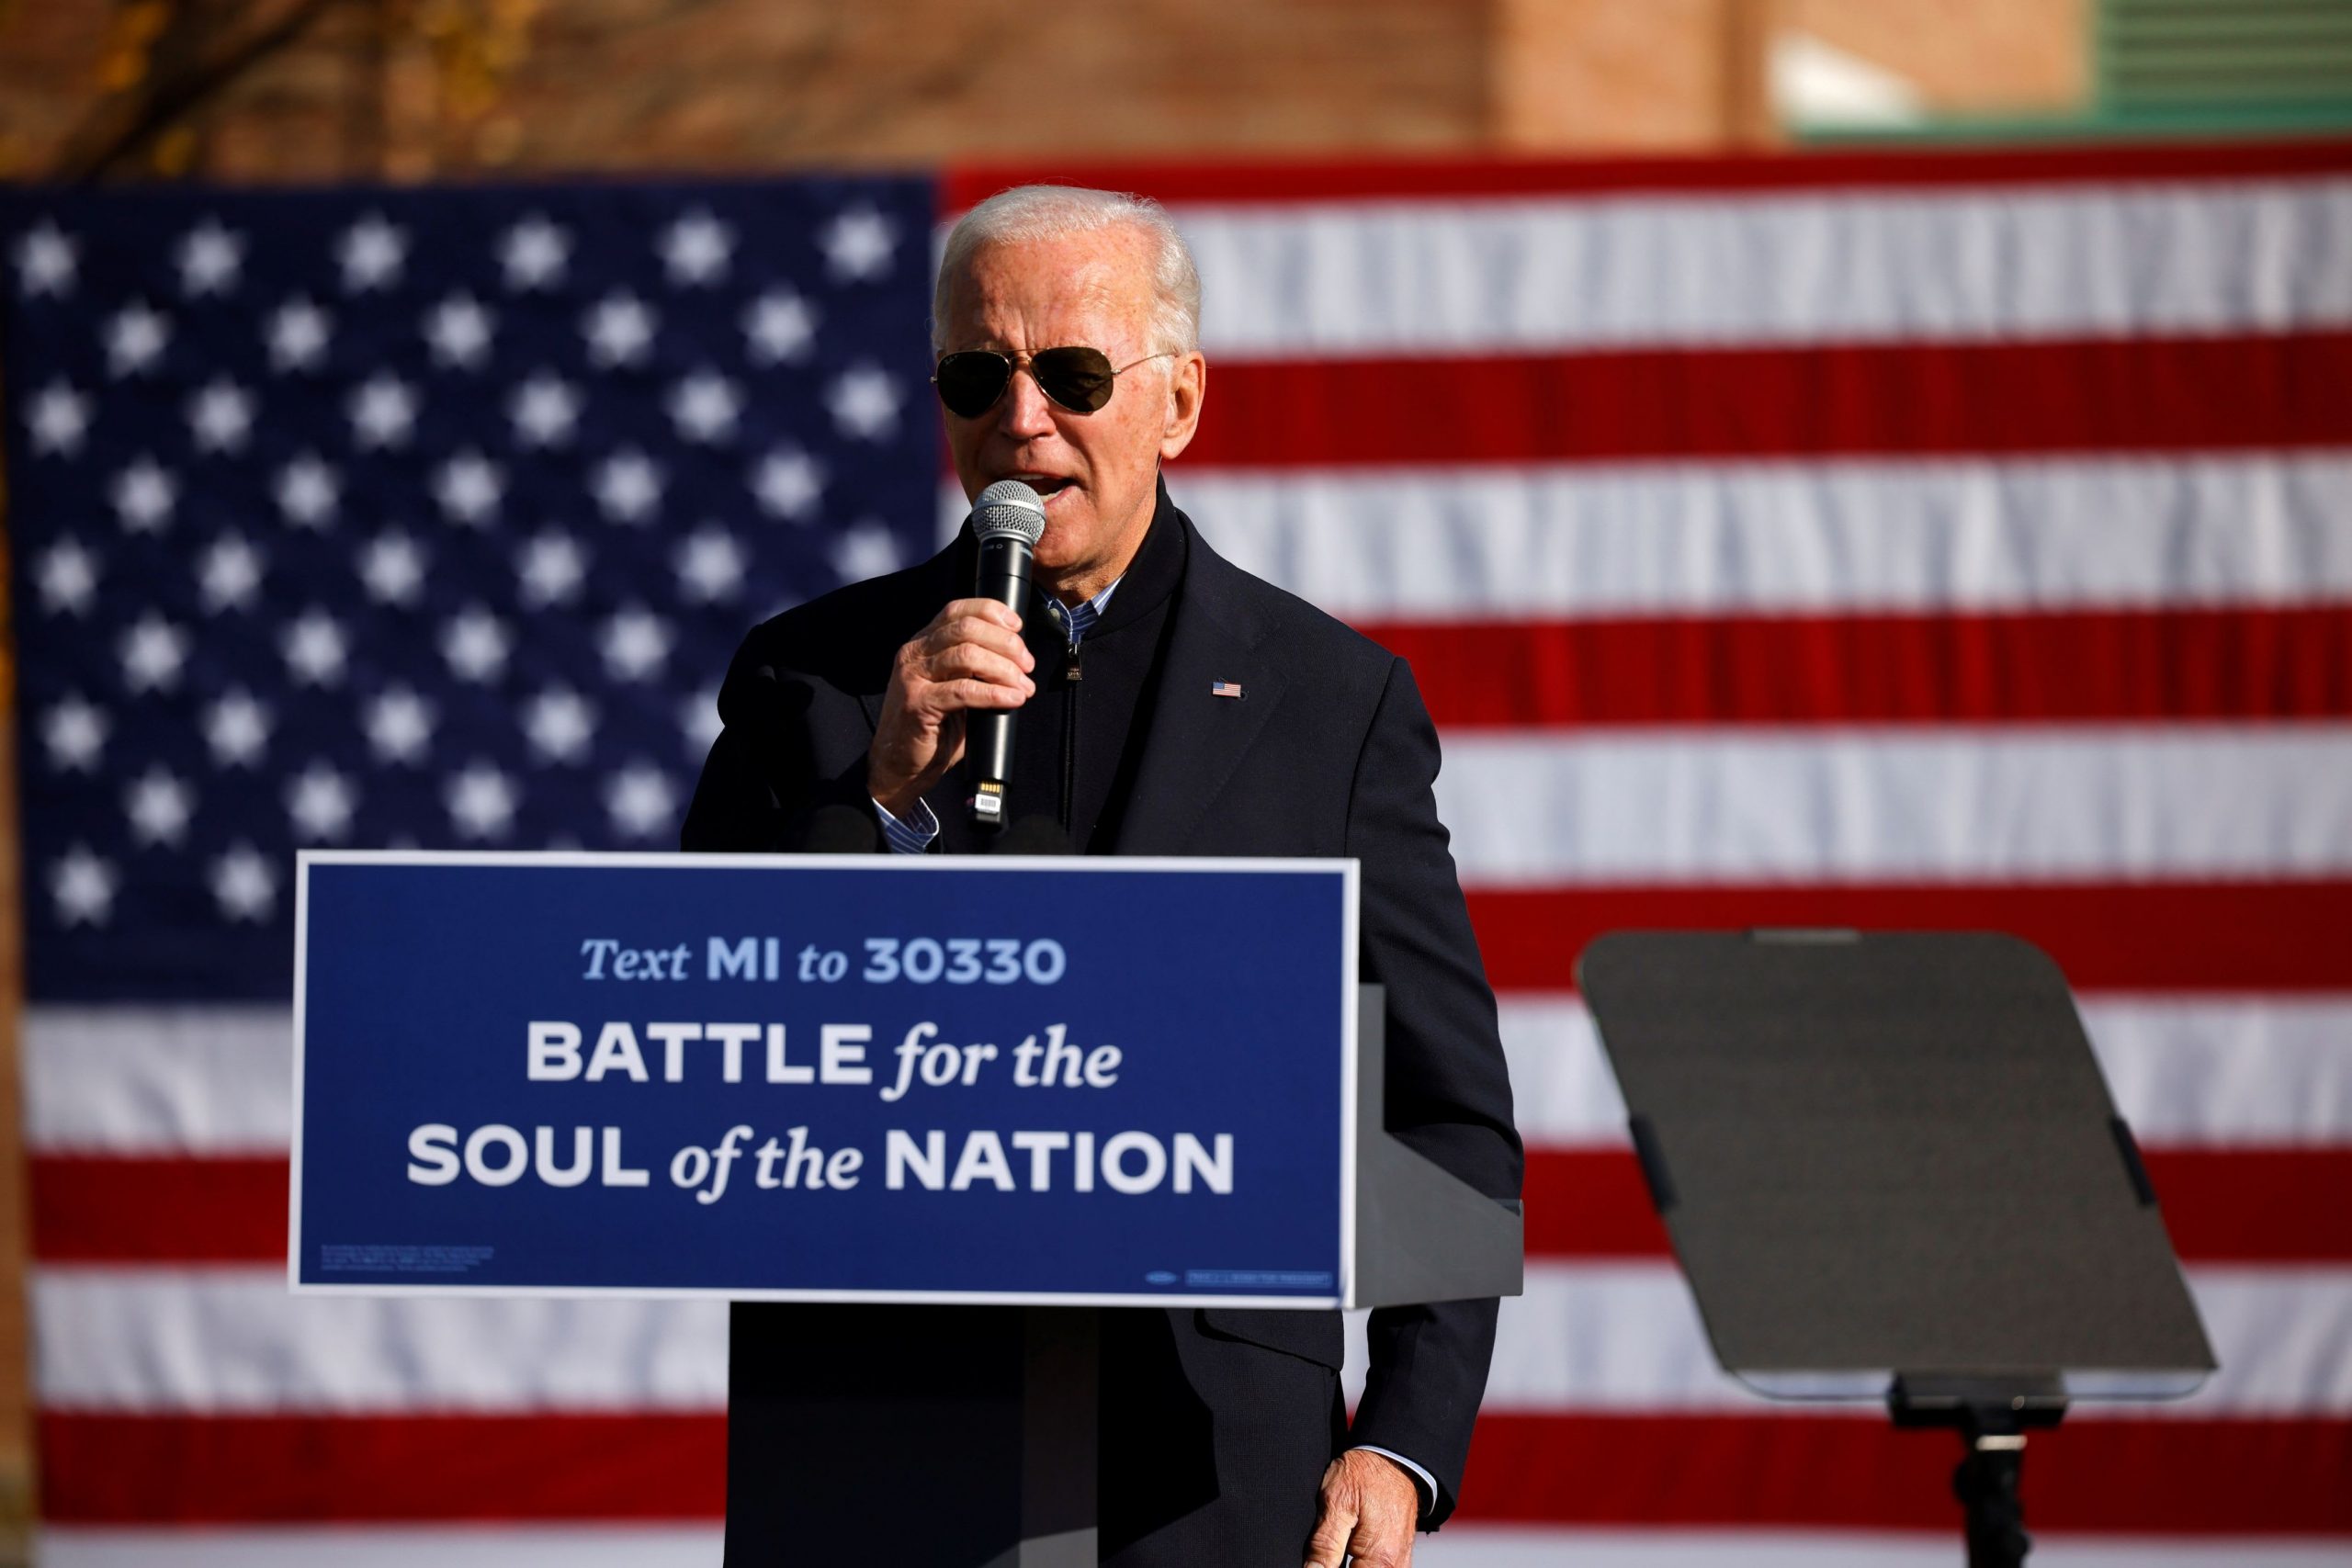 Biden leads Trump by 10 factors in ultimate days earlier than election: NBC/WSJ ballot